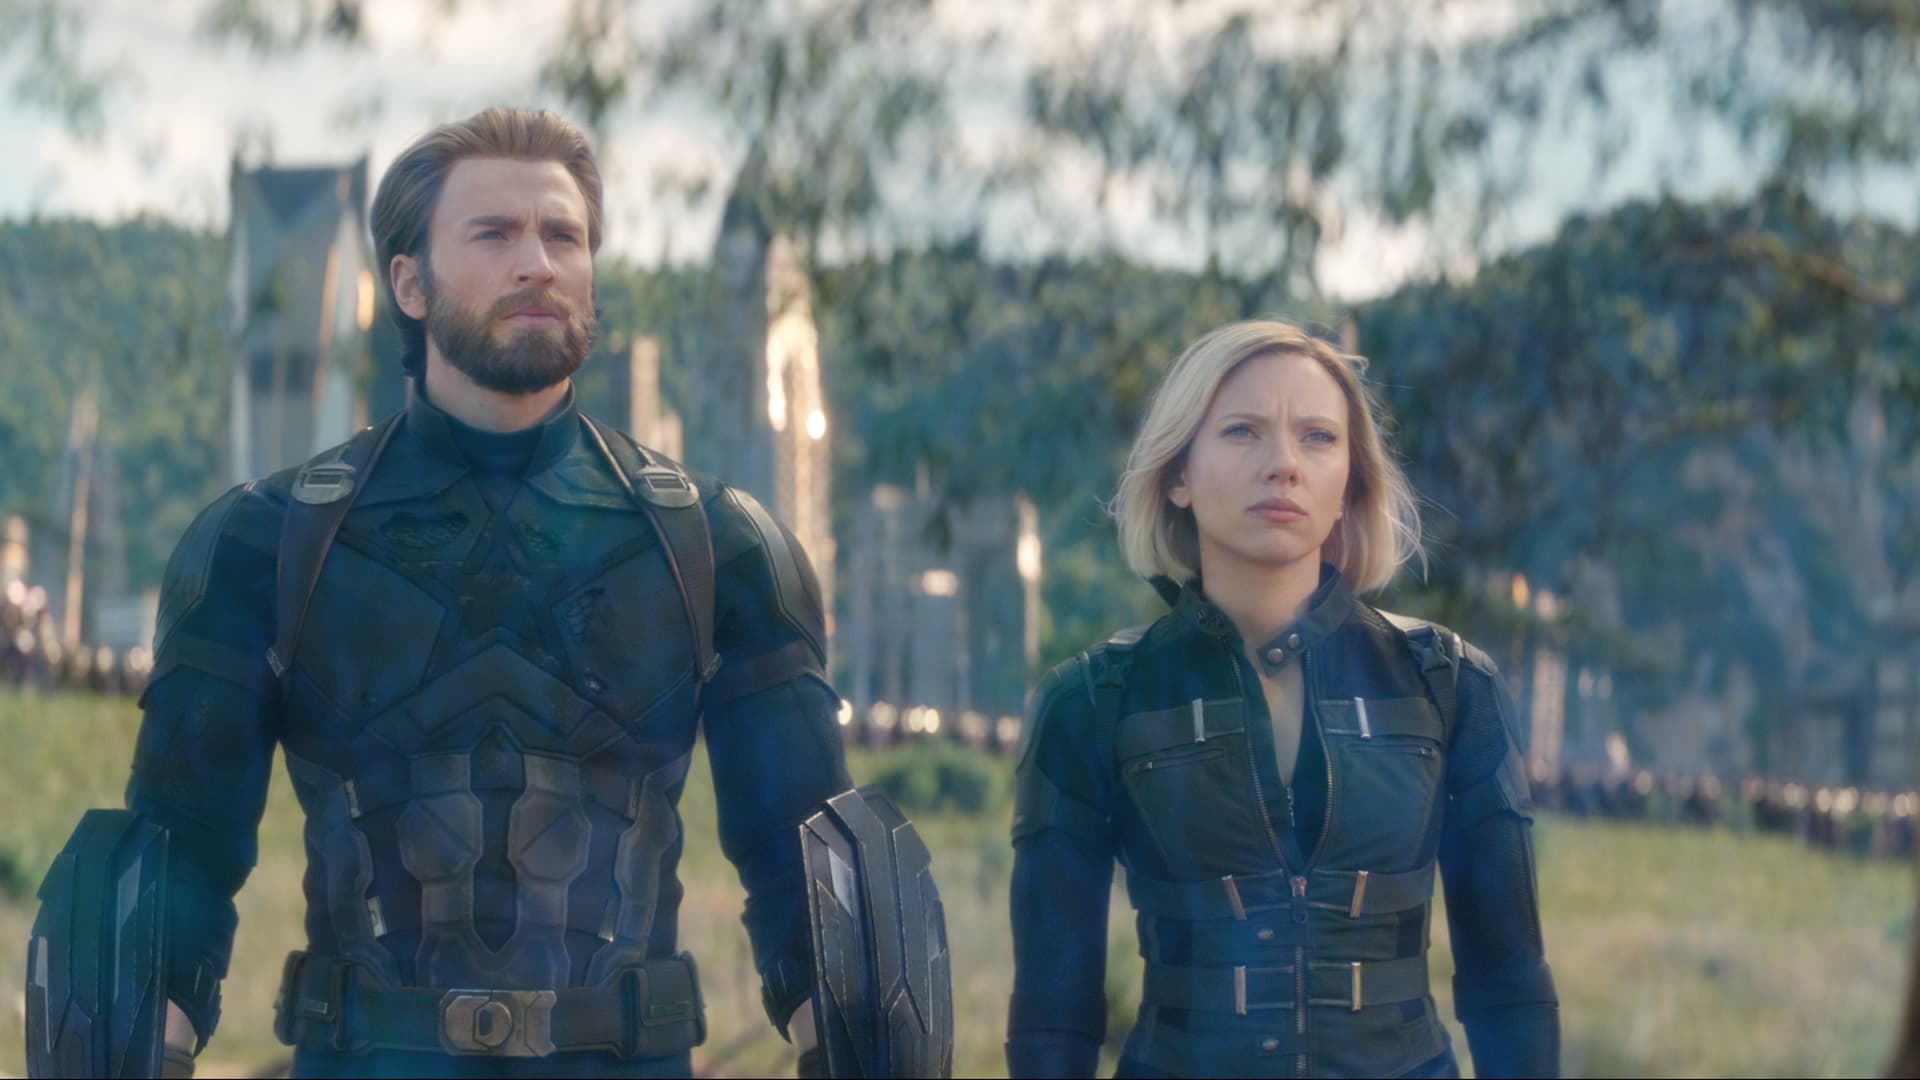 Avengers' real 'Endgame': Another $2 billion at the box office